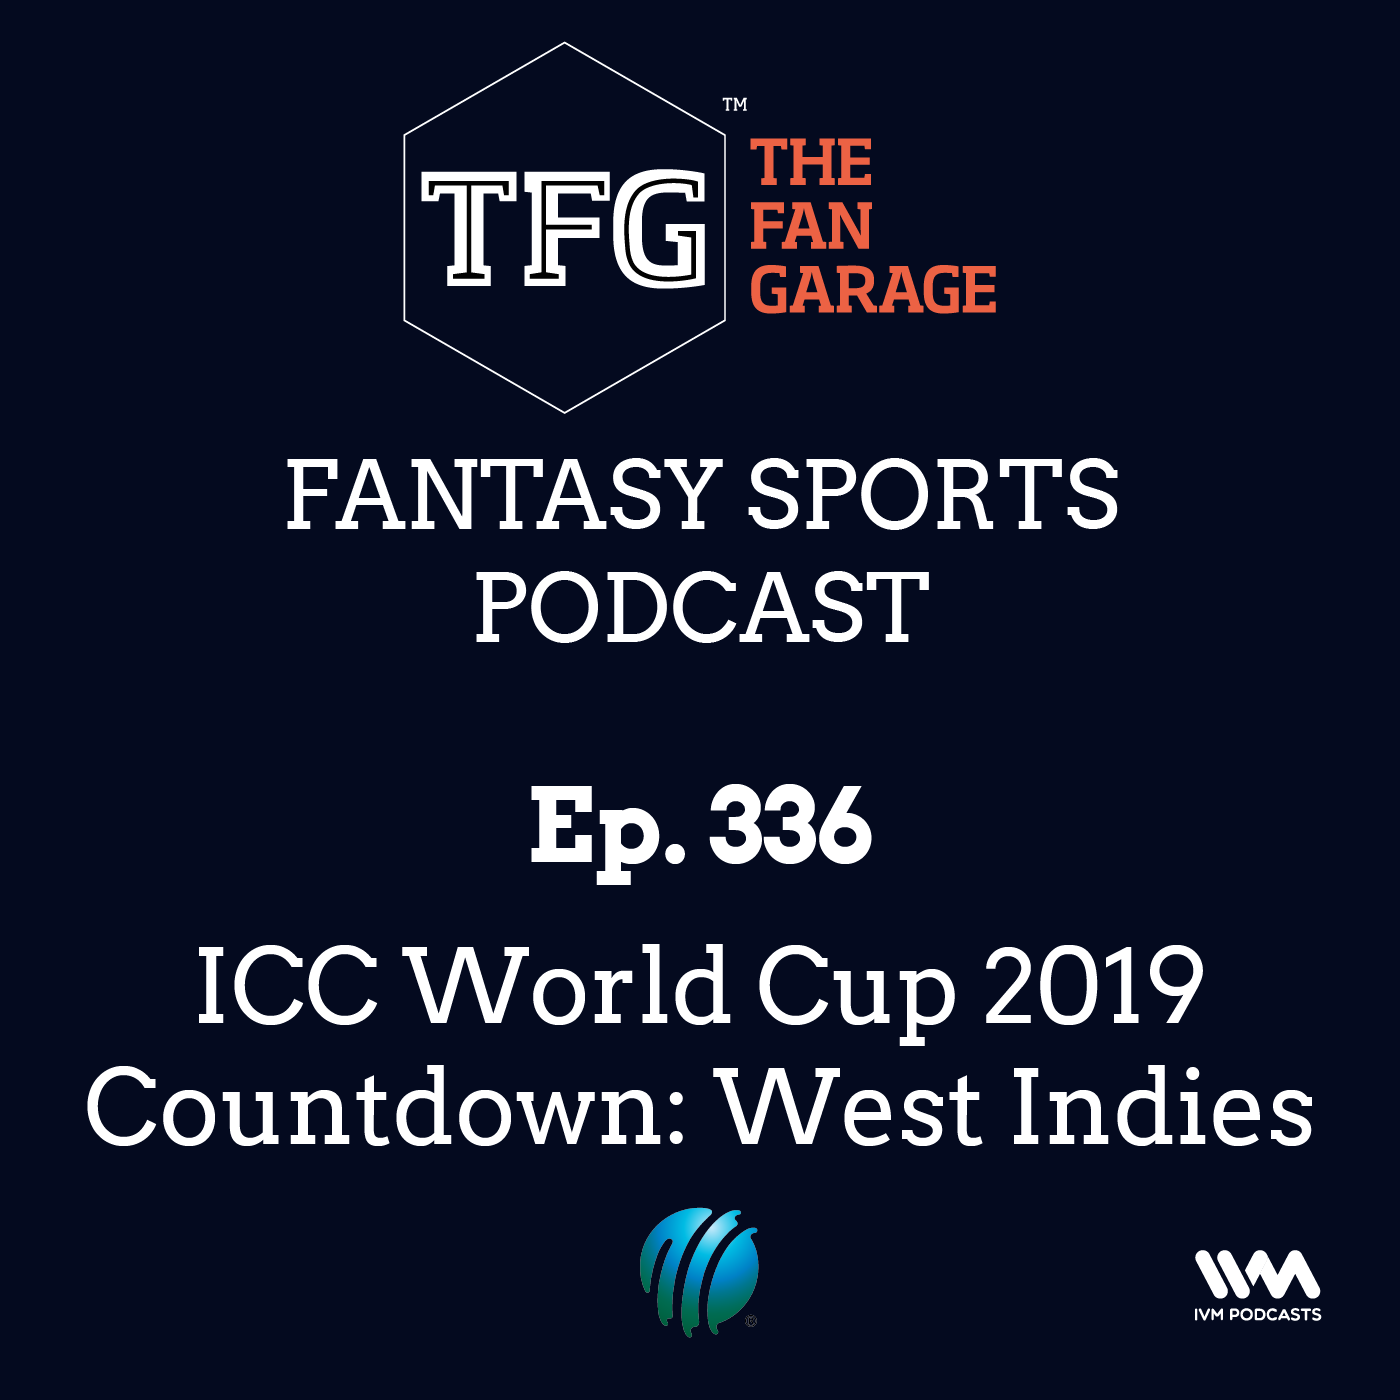 TFG Fantasy Sports Podcast Ep. 336: ICC World Cup 2019 Countdown: West Indies